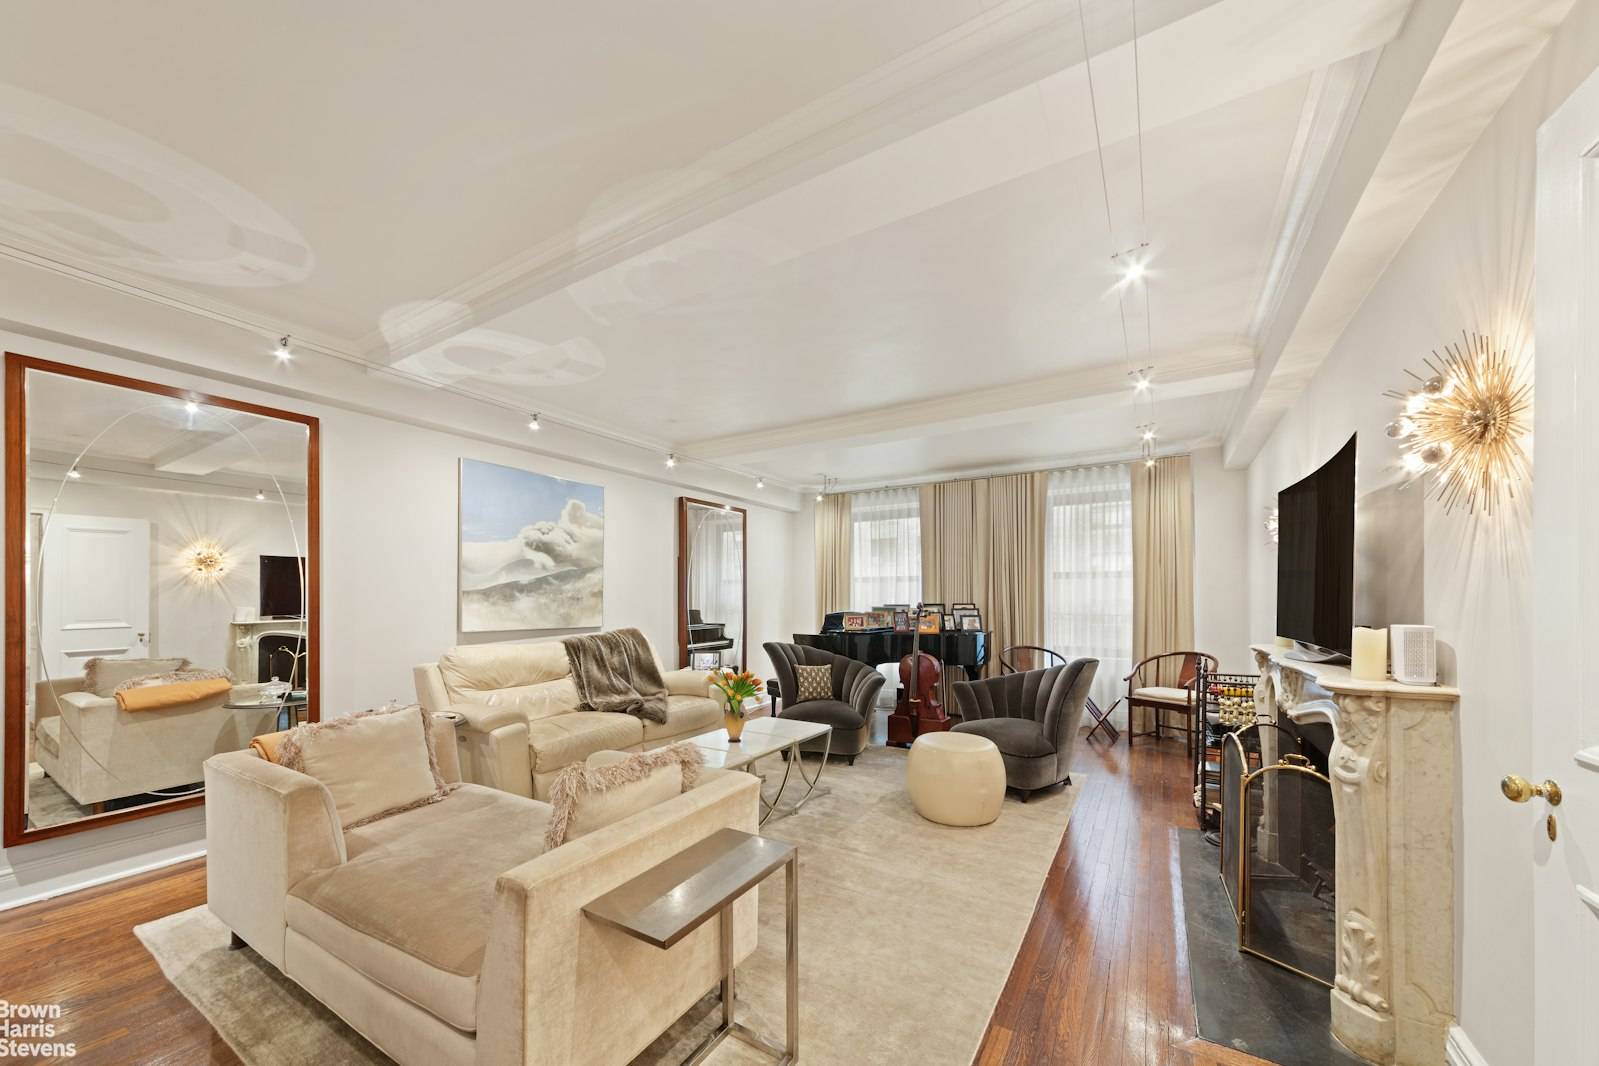 GRAND AND BEAUTIFUL PREWAR 7 ROOMWelcome home to this gorgeous oversized 7 Room sprawling and bright Pre War Home, nestled in the heart of the Upper East Side.